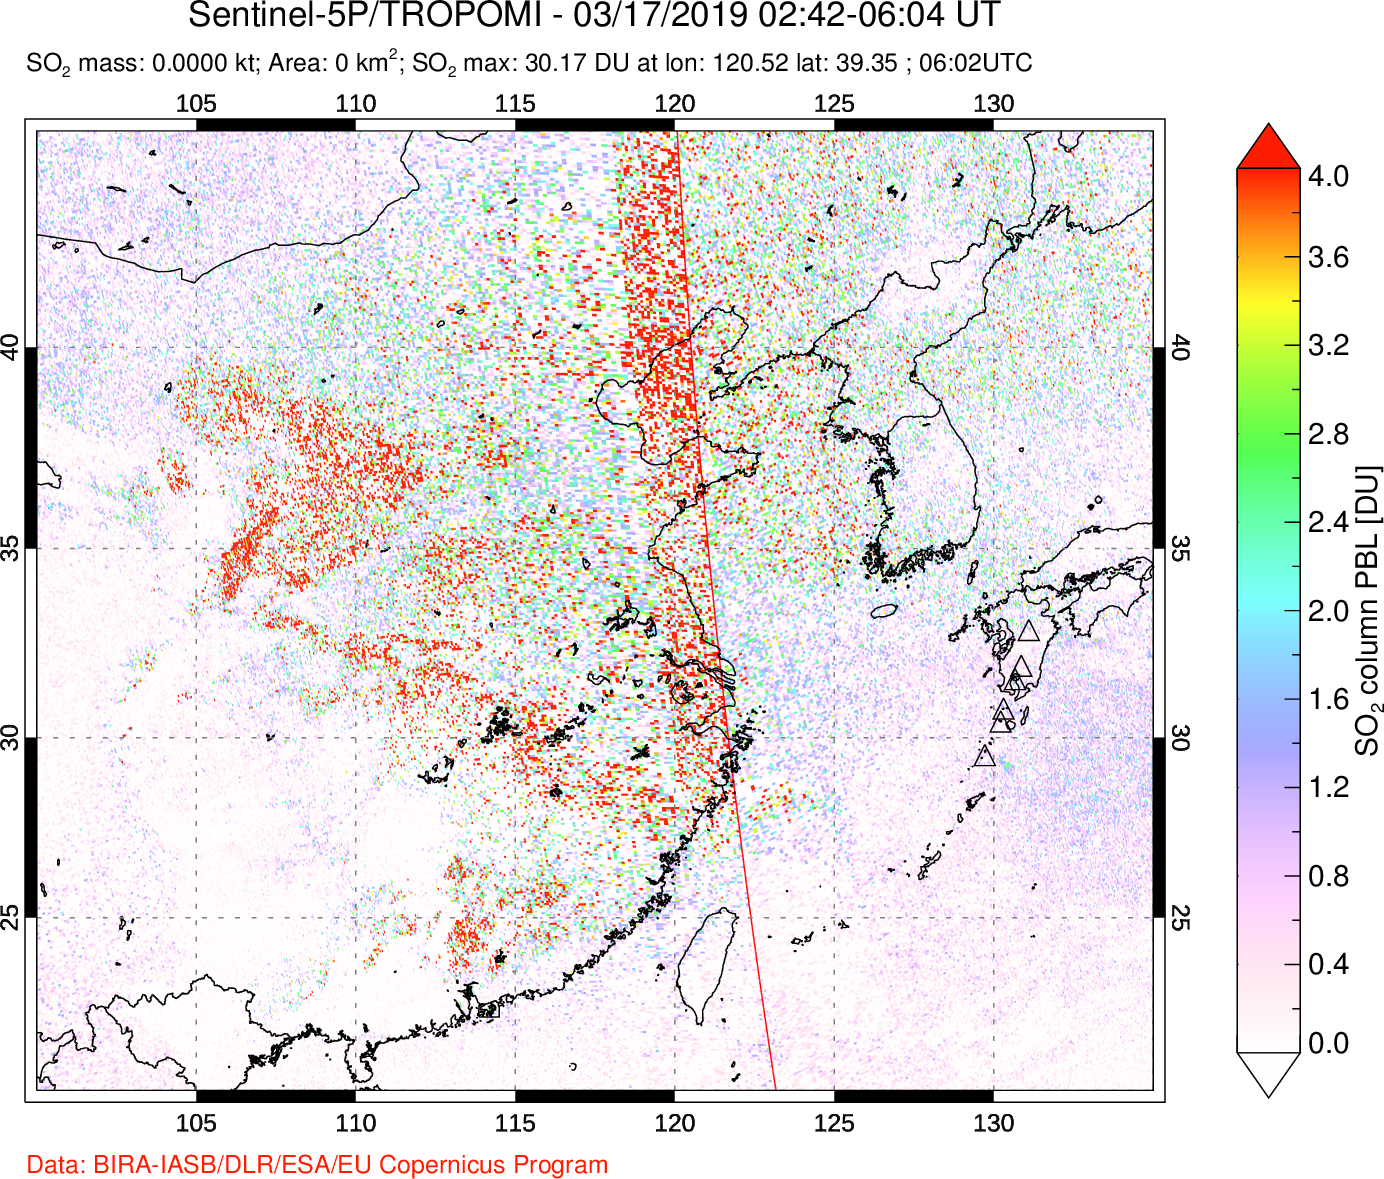 A sulfur dioxide image over Eastern China on Mar 17, 2019.